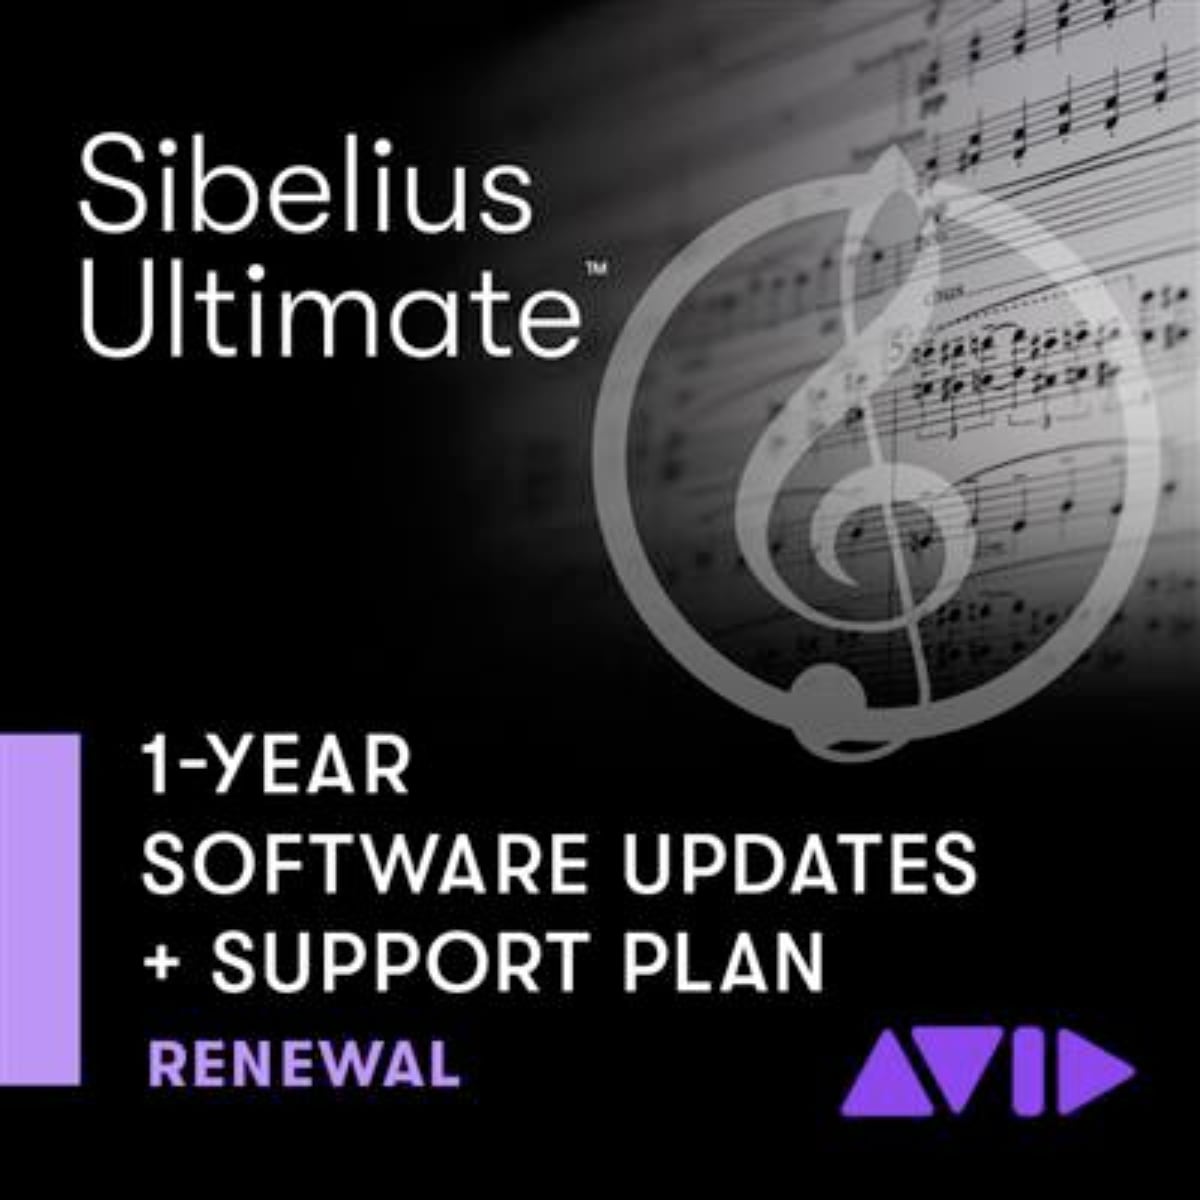 AVID Sibelius | Ultimate Upgrade 1-Year Software Updates + Support Plan - GET CURRENT